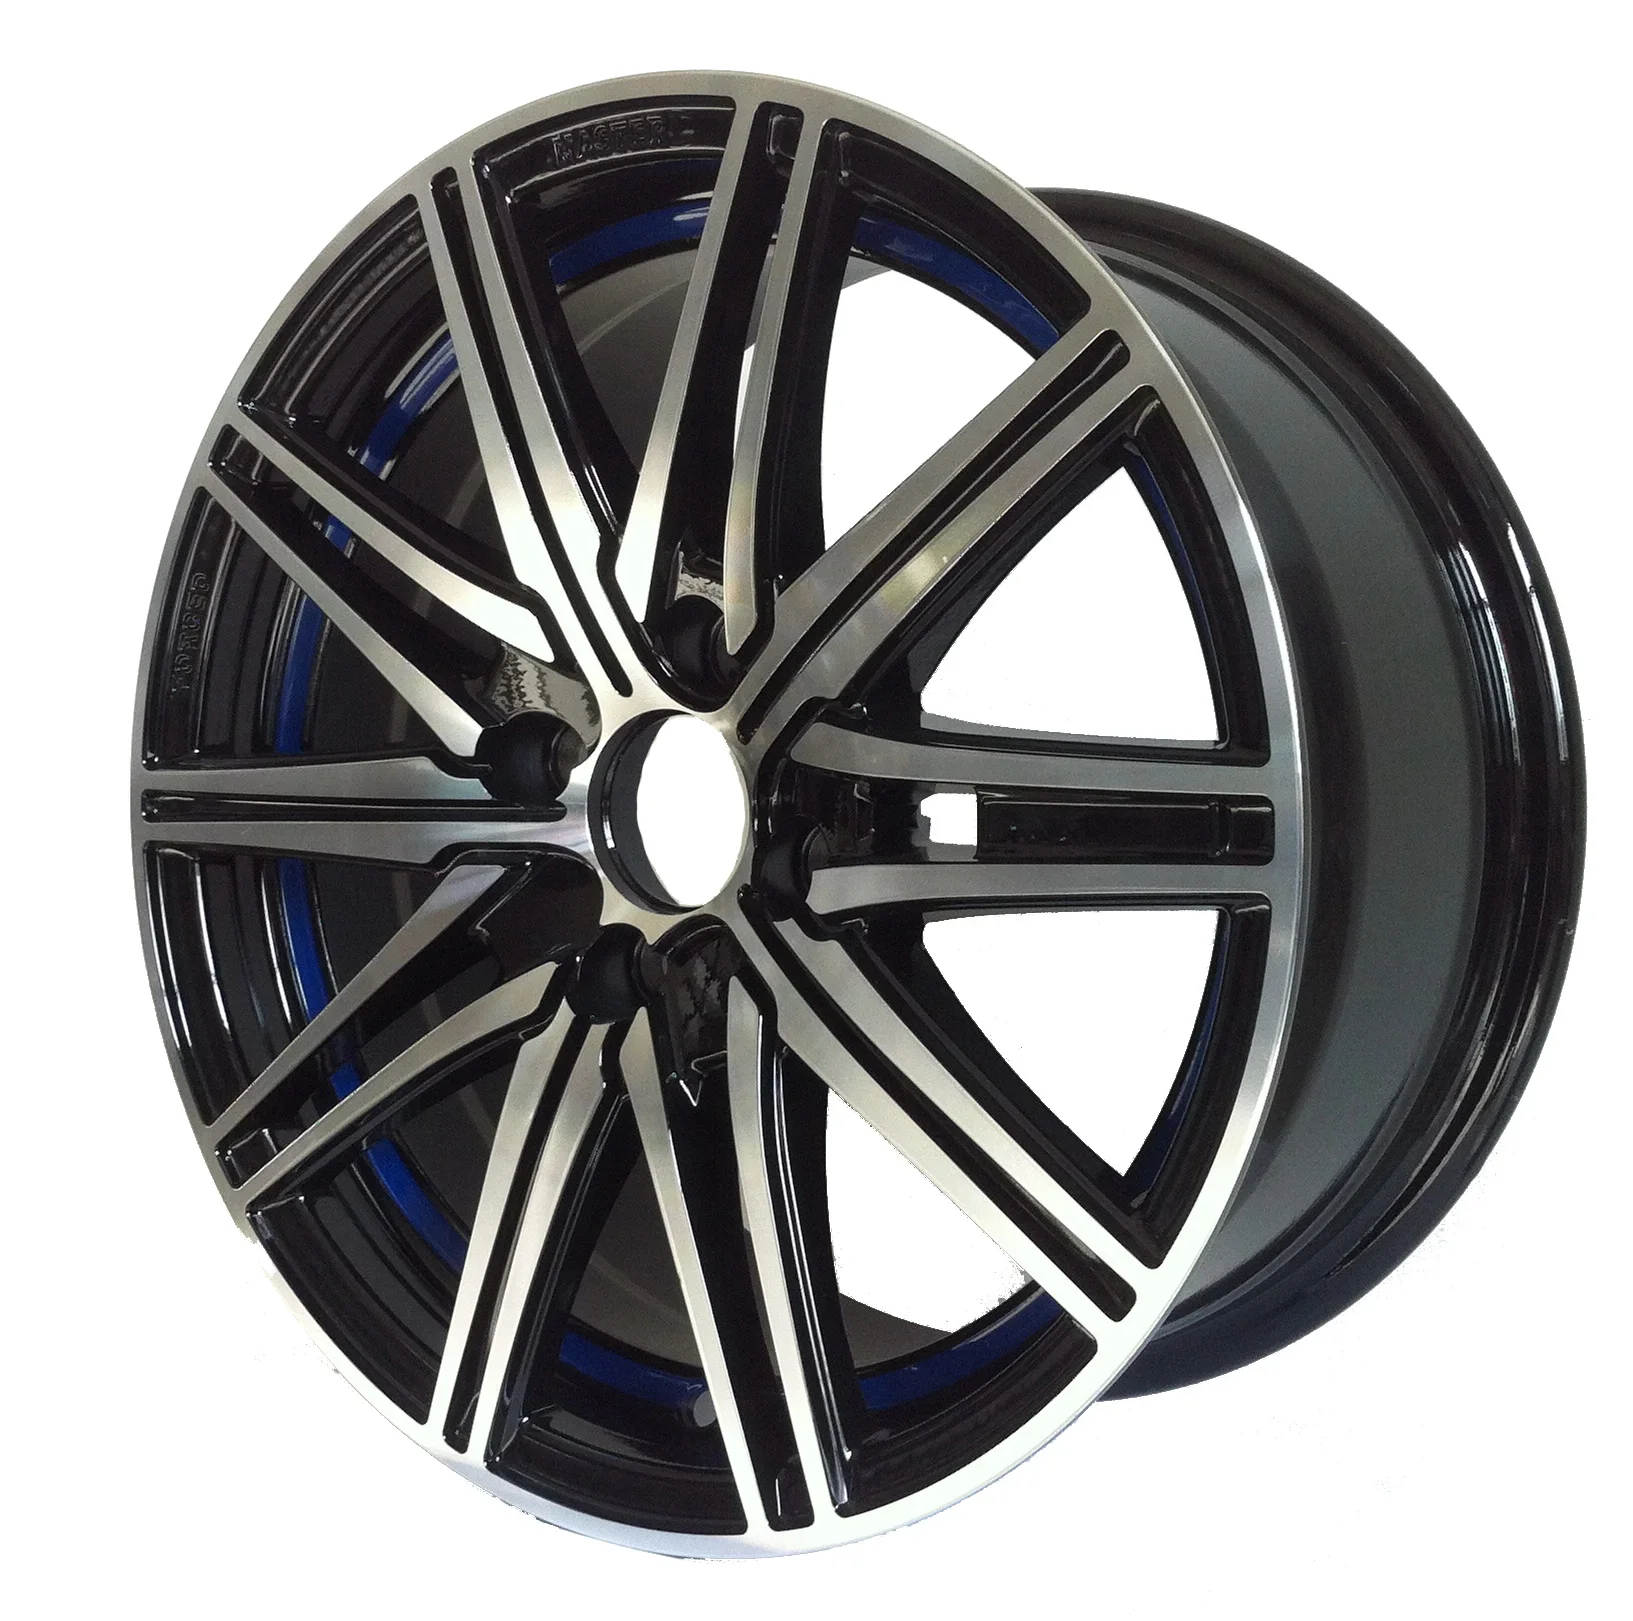 15 Inch Car Rims Alloy Wheels Hot Selling with Black Machine Face Lip